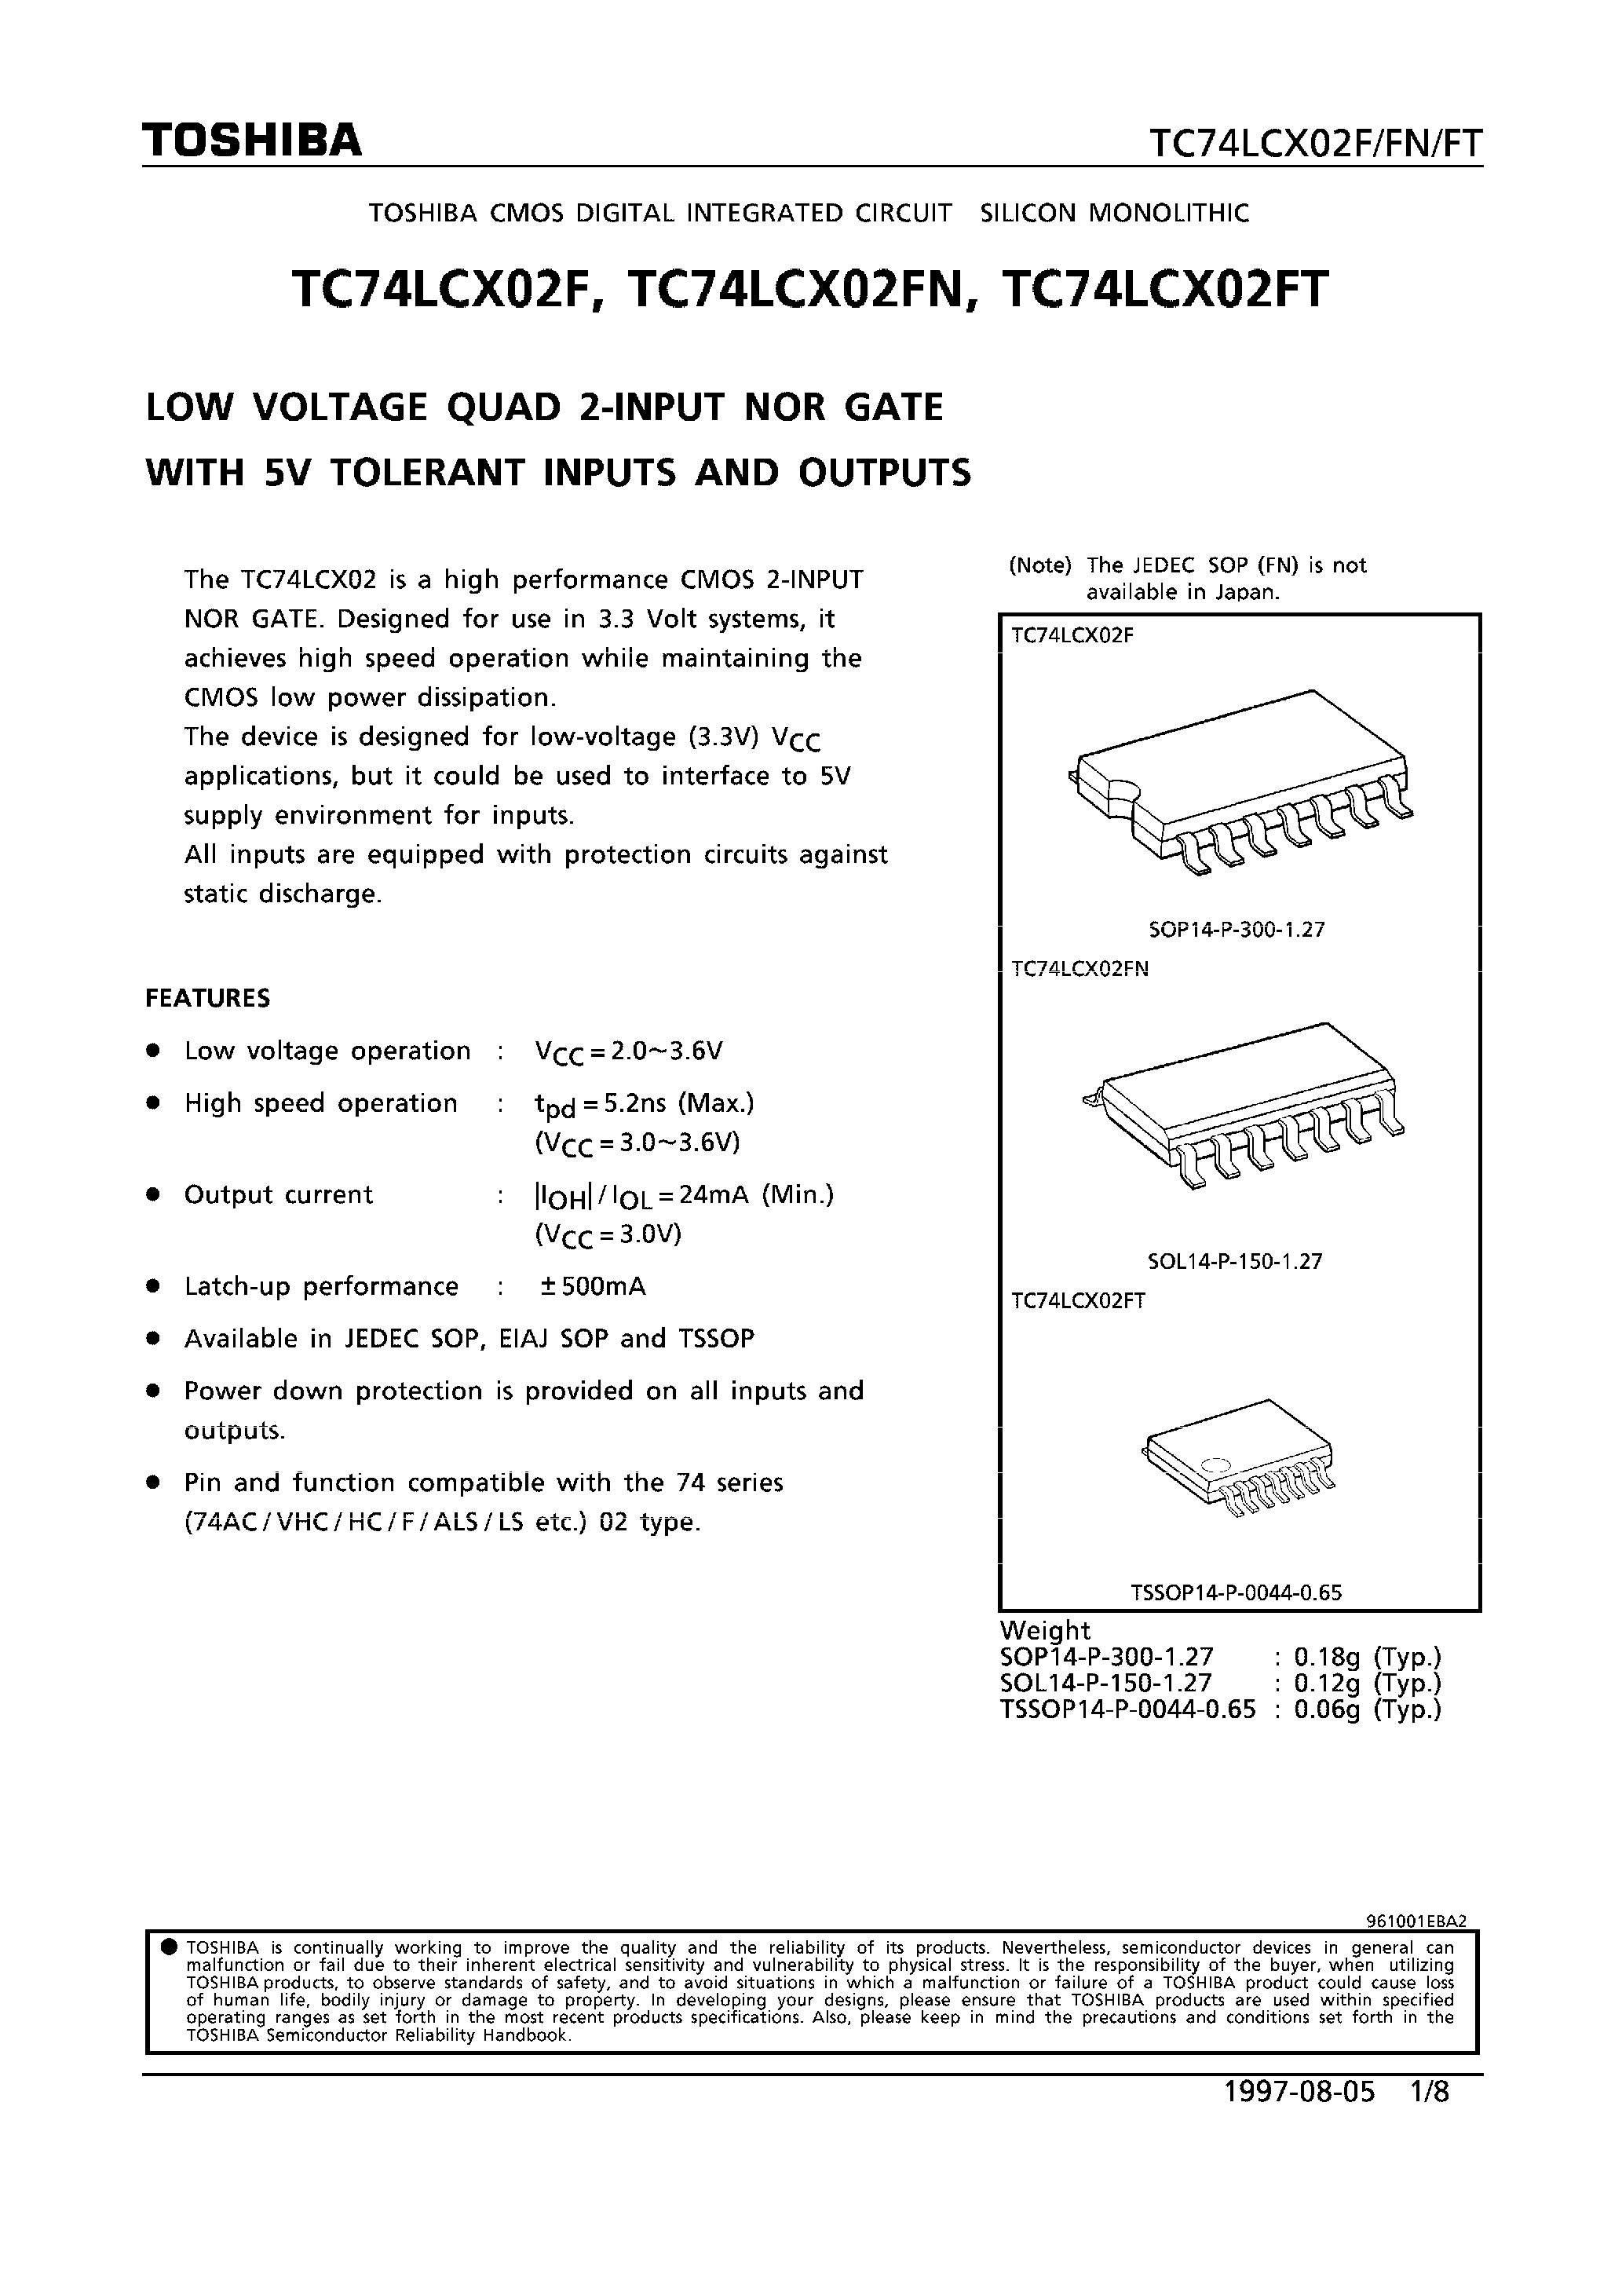 Datasheet 74LCX02 - LOW VOLTAGE QUAD 2-INPUT NOR GATE WITH 5V TOLERANT INPUTS AND OUTPUTS page 1